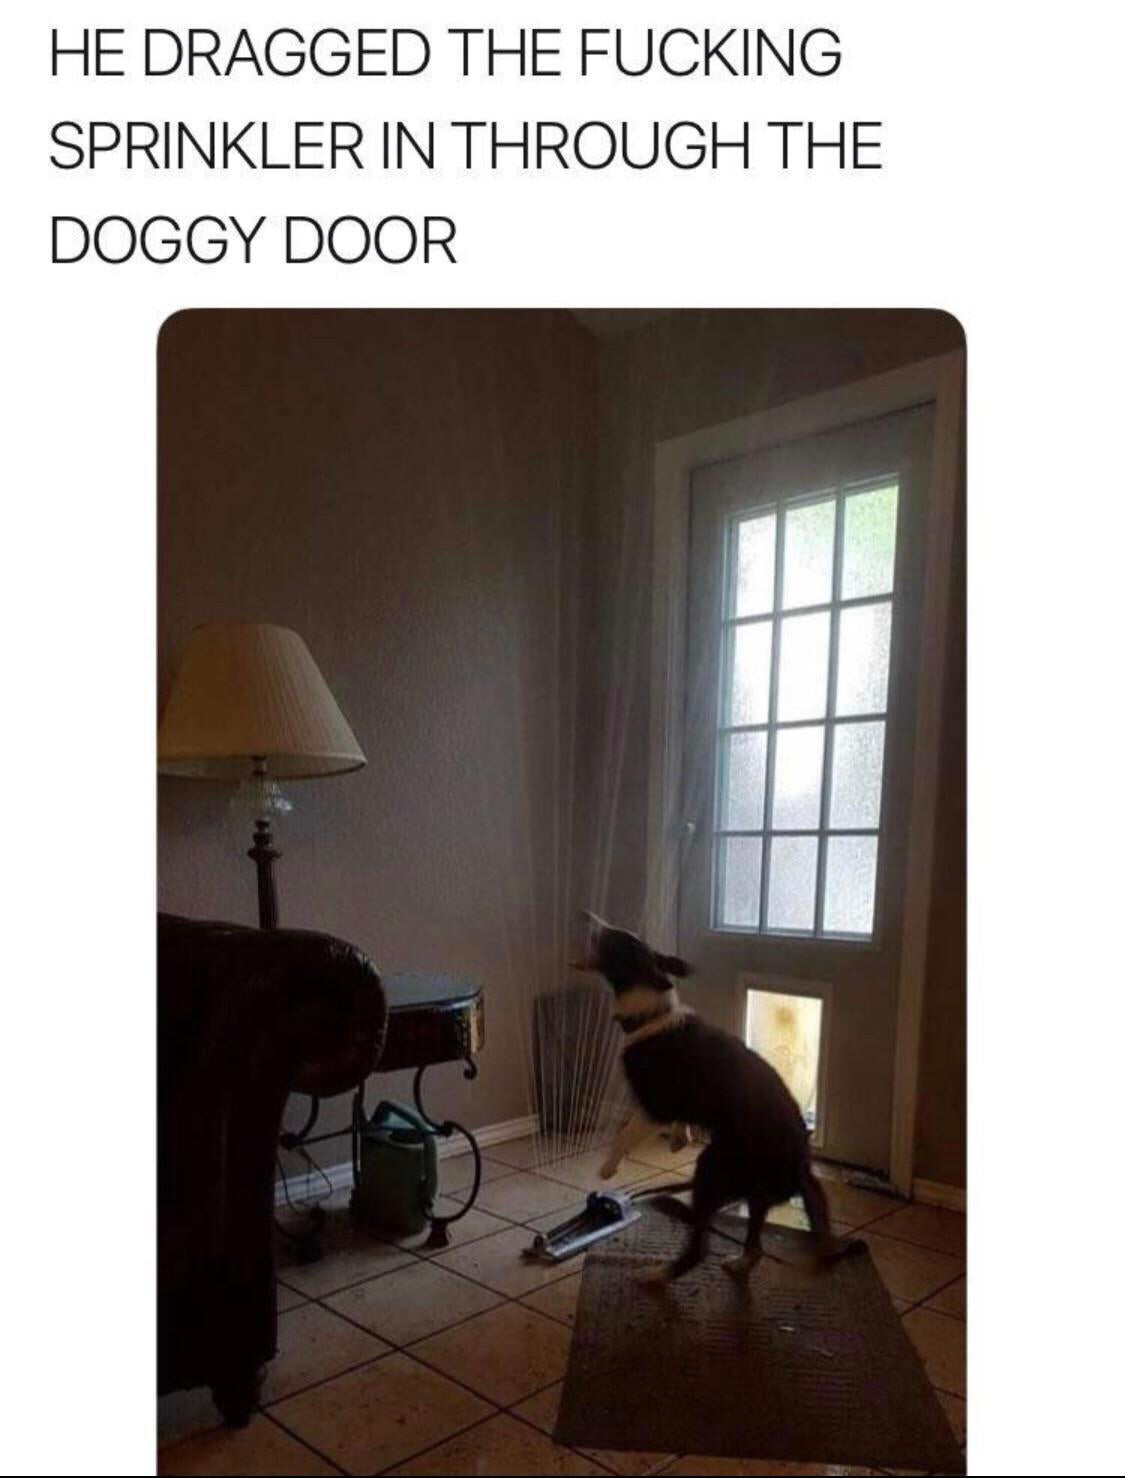 he dragged the sprinkler through the doggy door - He Dragged The Fucking Sprinkler In Through The Doggy Door